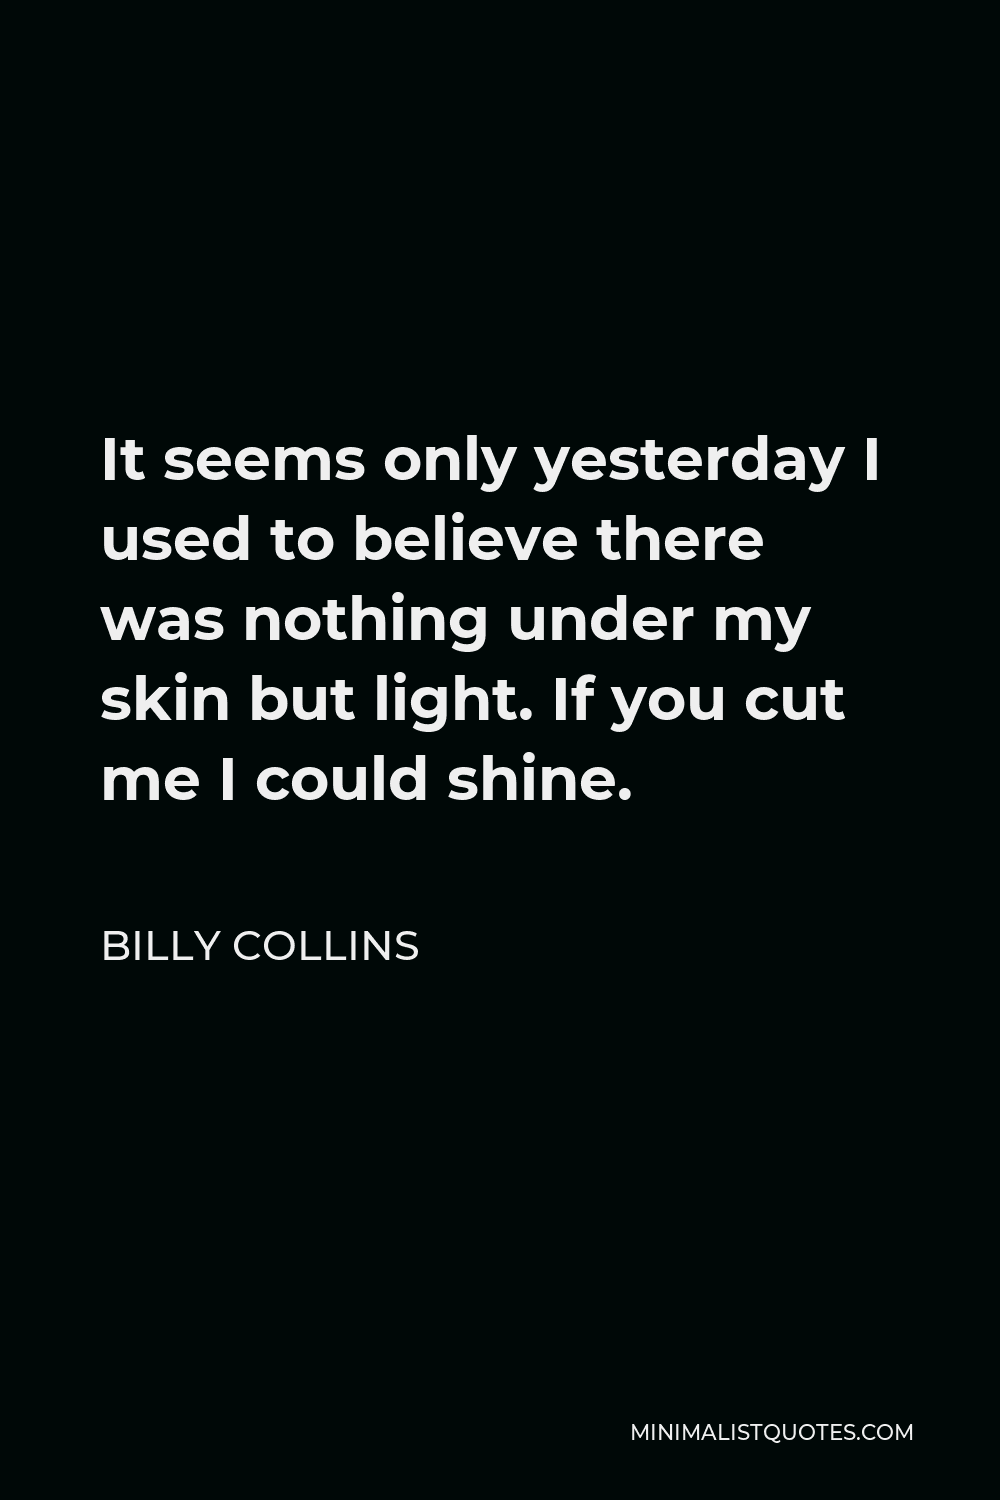 Billy Collins Quote - It seems only yesterday I used to believe there was nothing under my skin but light. If you cut me I could shine.